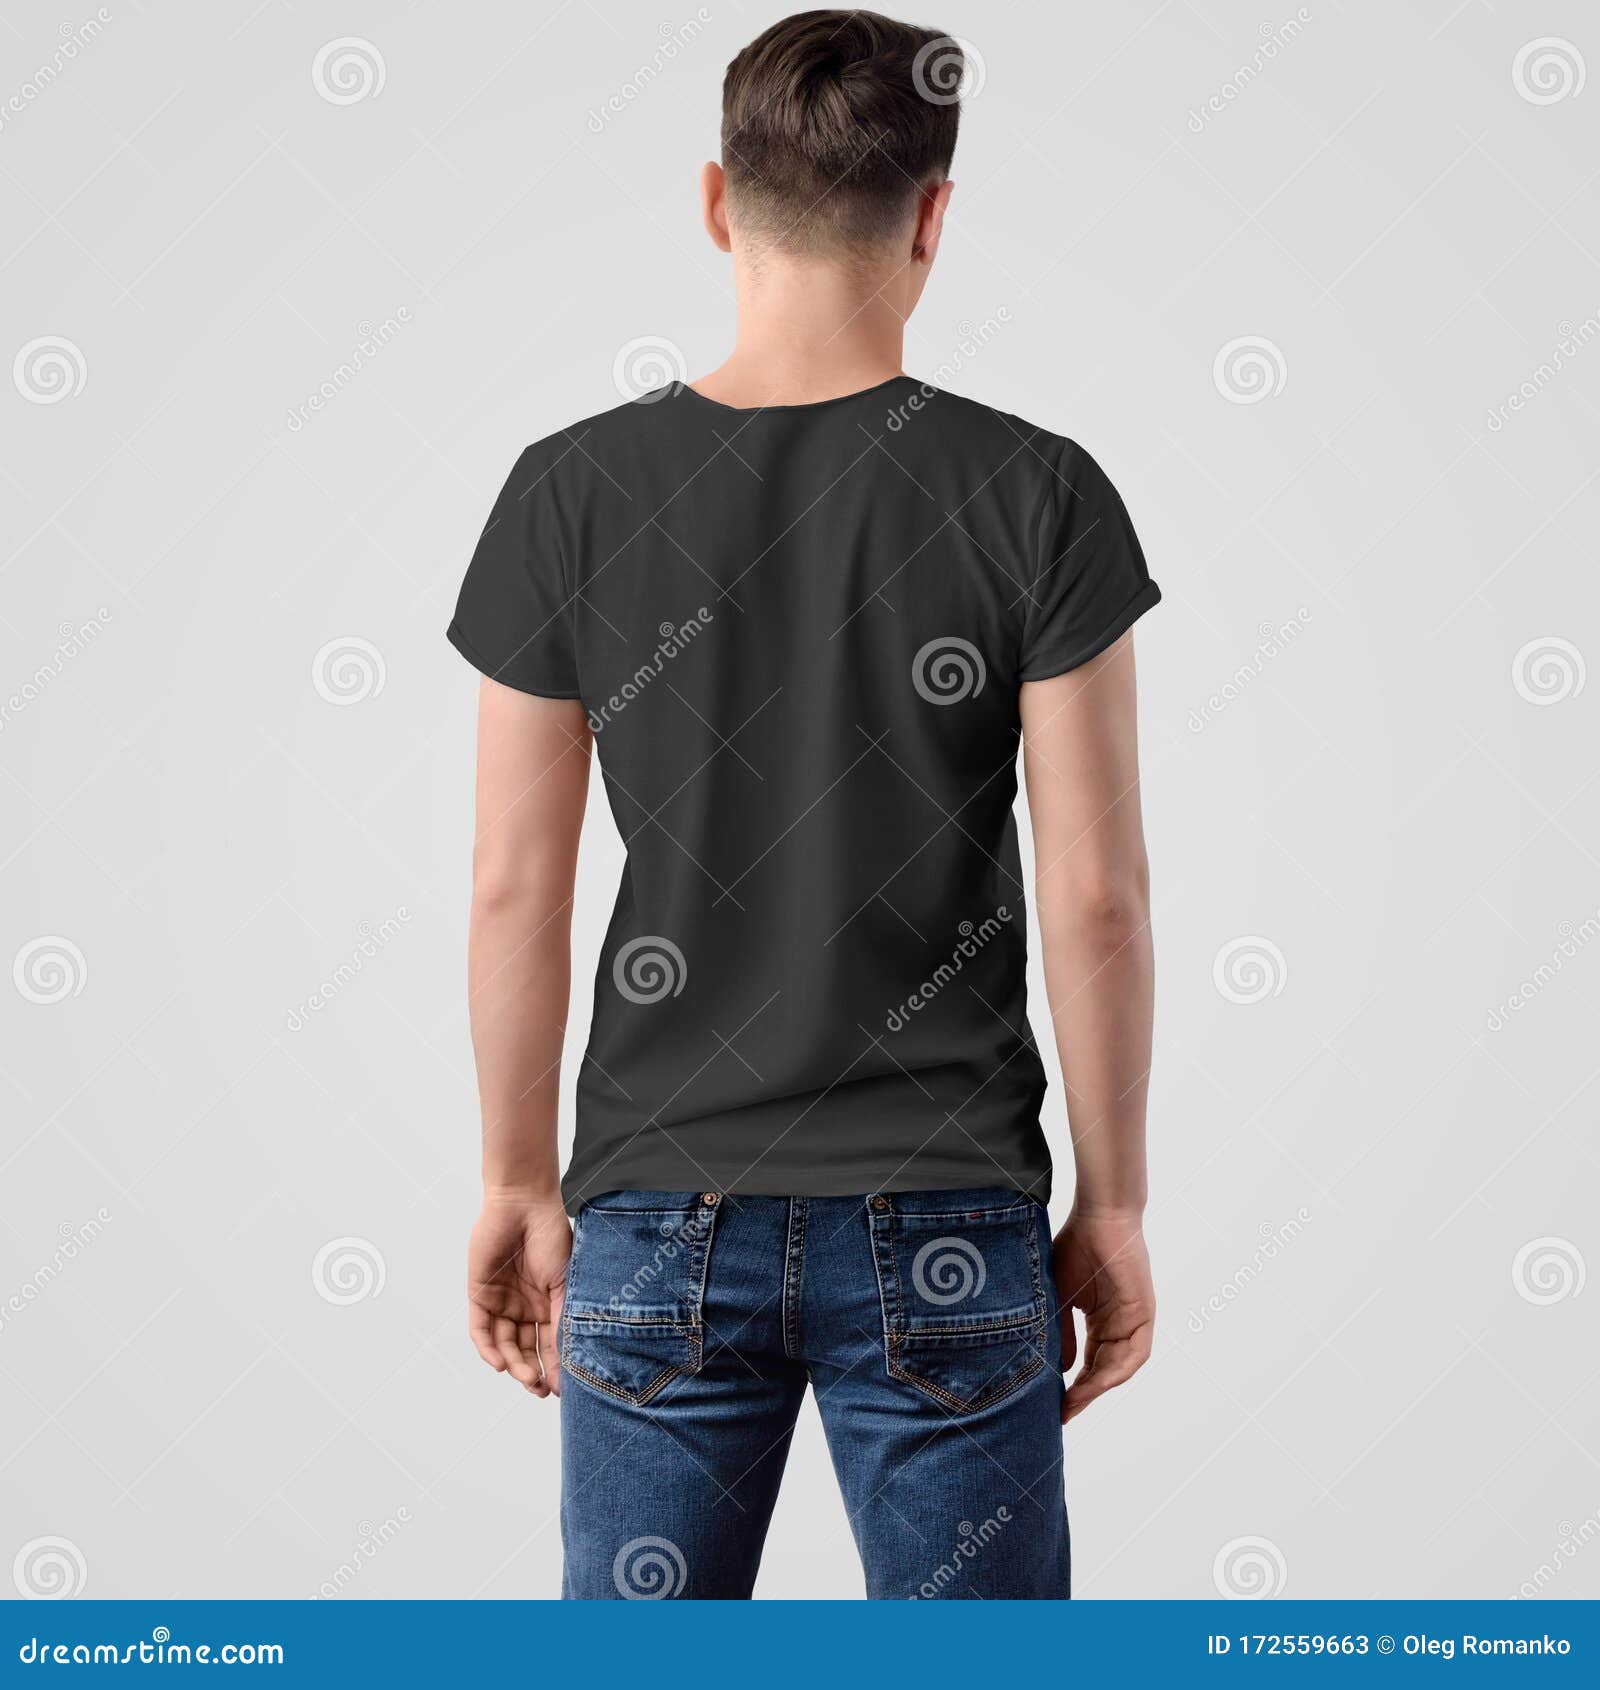 Blue Tshirts Front And Back Used As Design Template Stock Photo